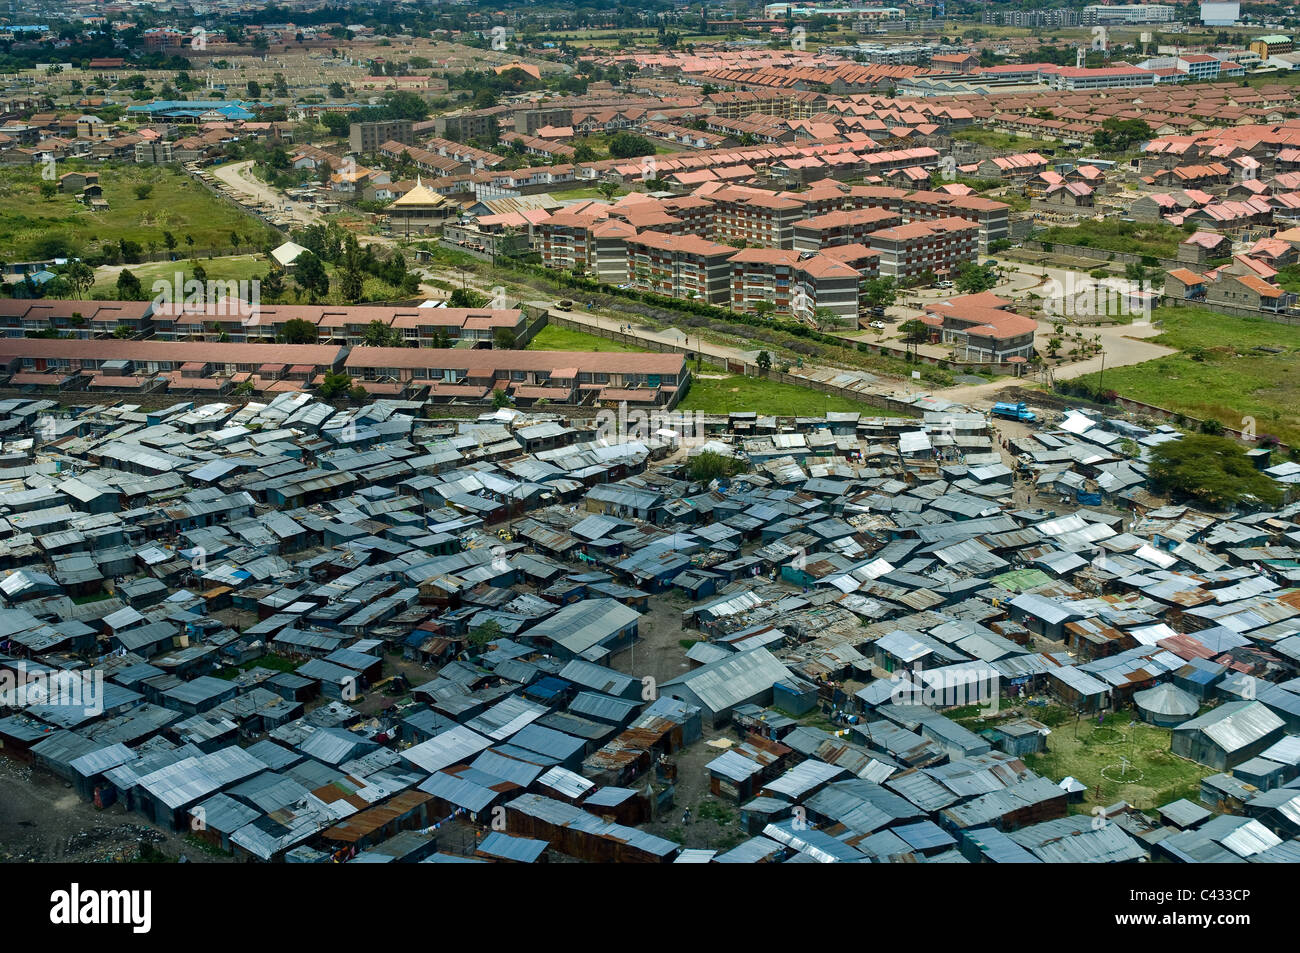 Aerial view of a slum and middle class suburb, Nairobi, Kenya Stock Photo